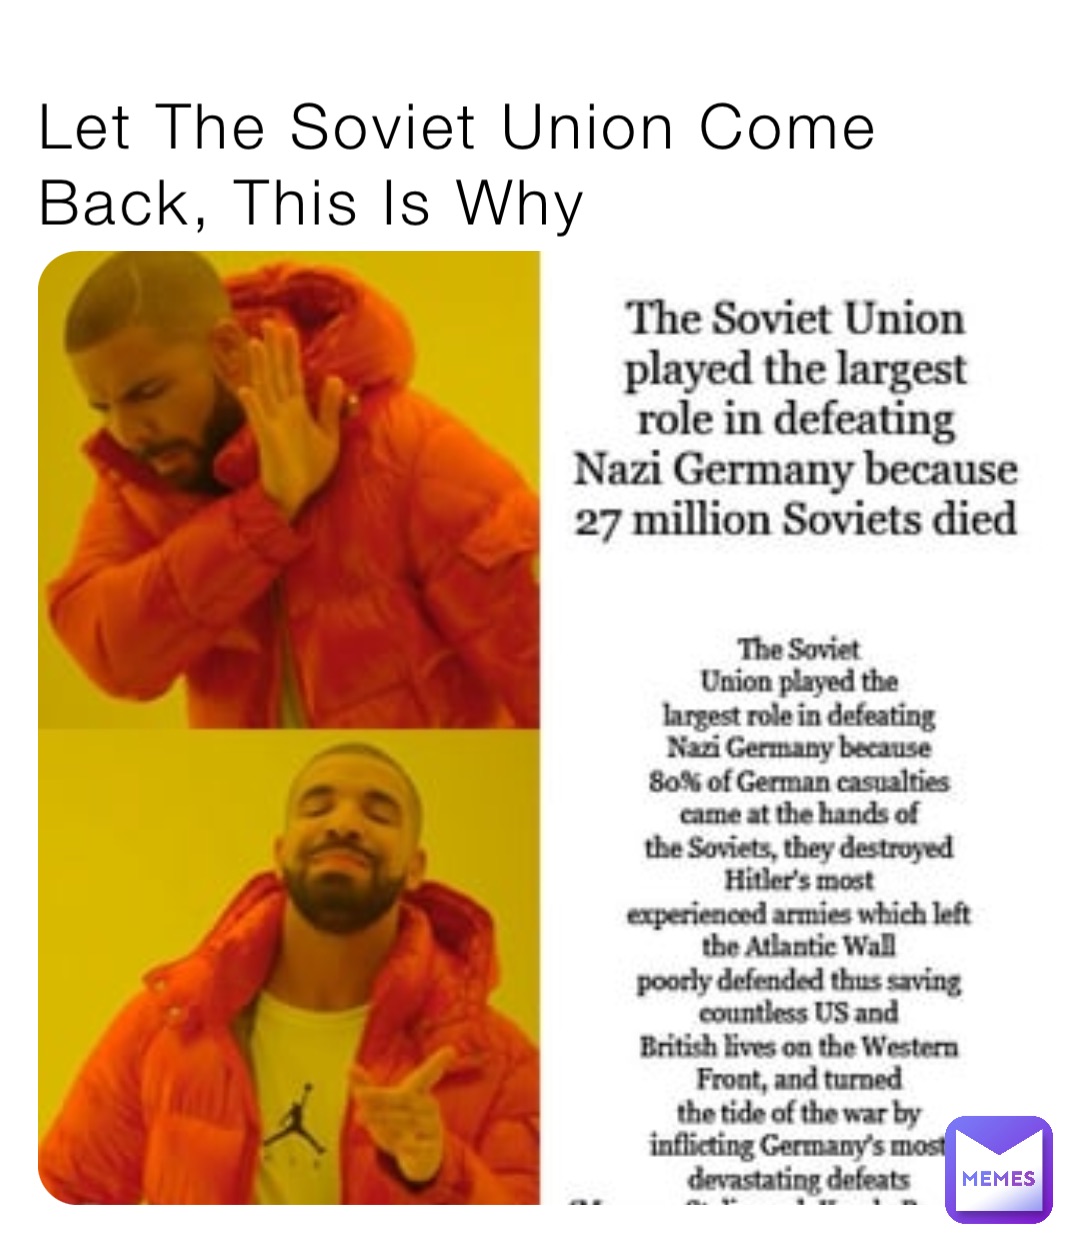 Let The Soviet Union Come Back, This Is Why